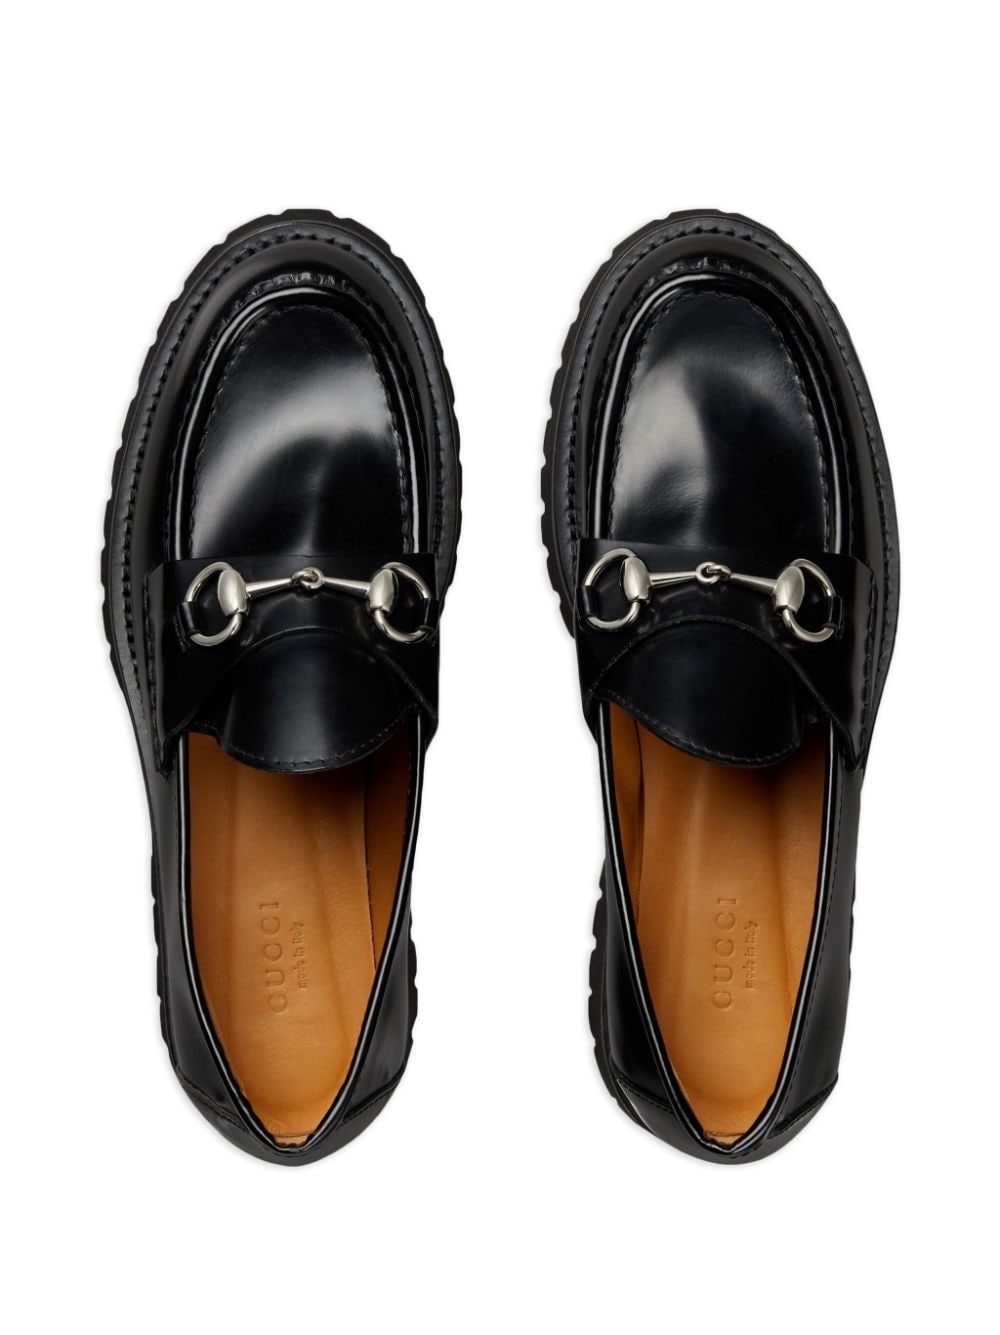 Horsebit-detail leather loafers - 4